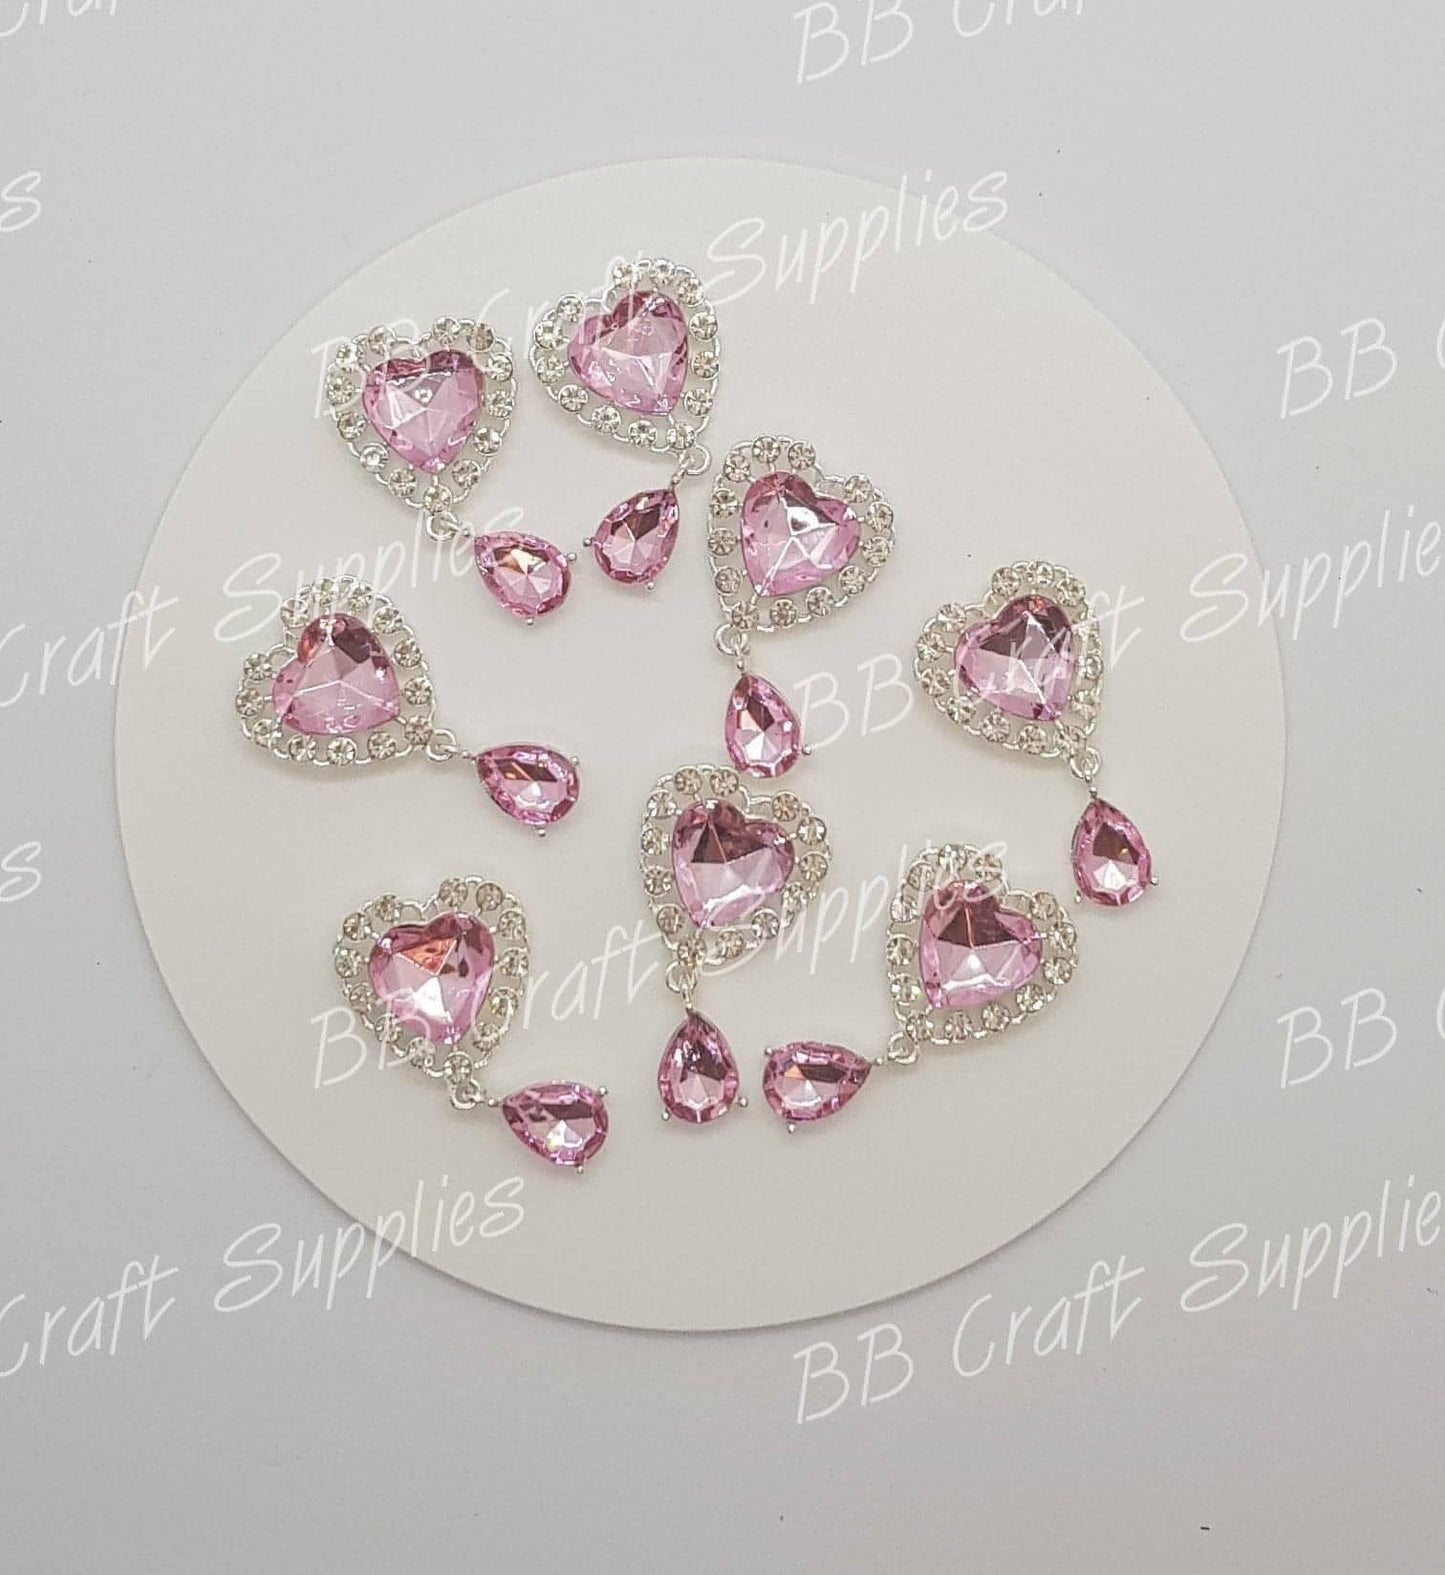 Rhinestone Heart with tear drop Embellishment's - drop, Embelishment, heart, Rhinestone, tear - Bare Butler Faux Leather Supplies 